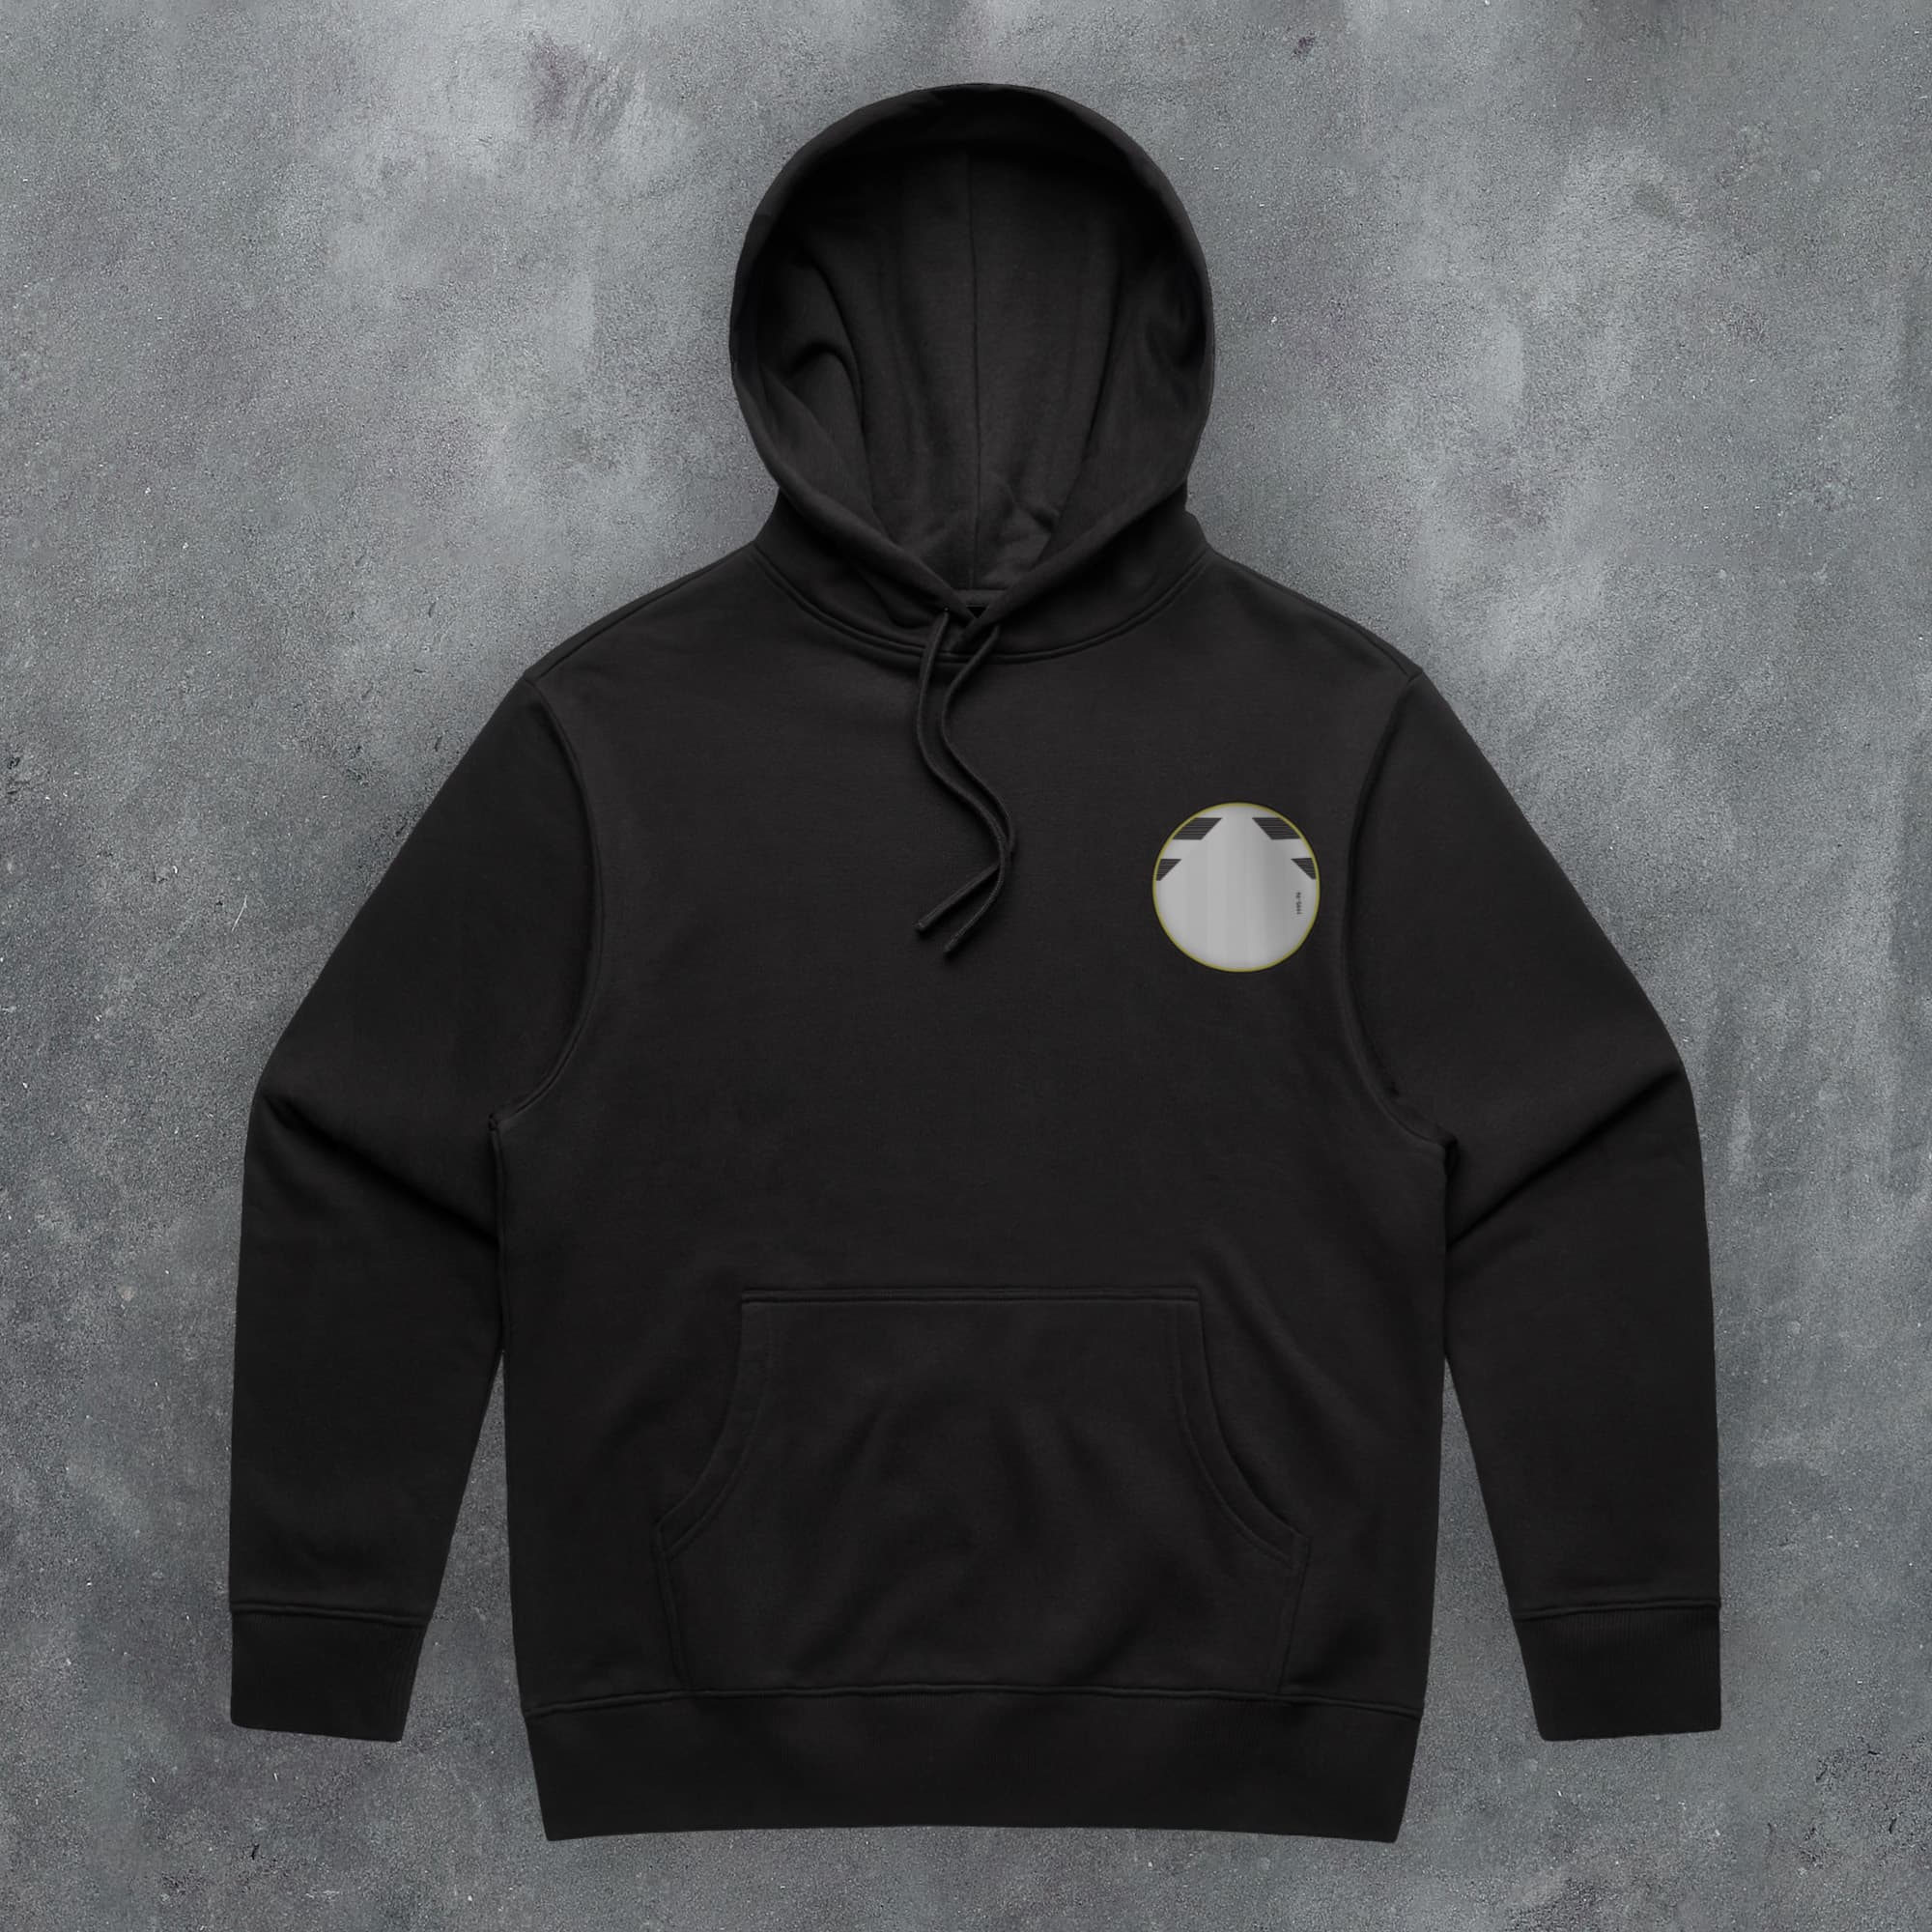 a black hoodie with a white apple on it